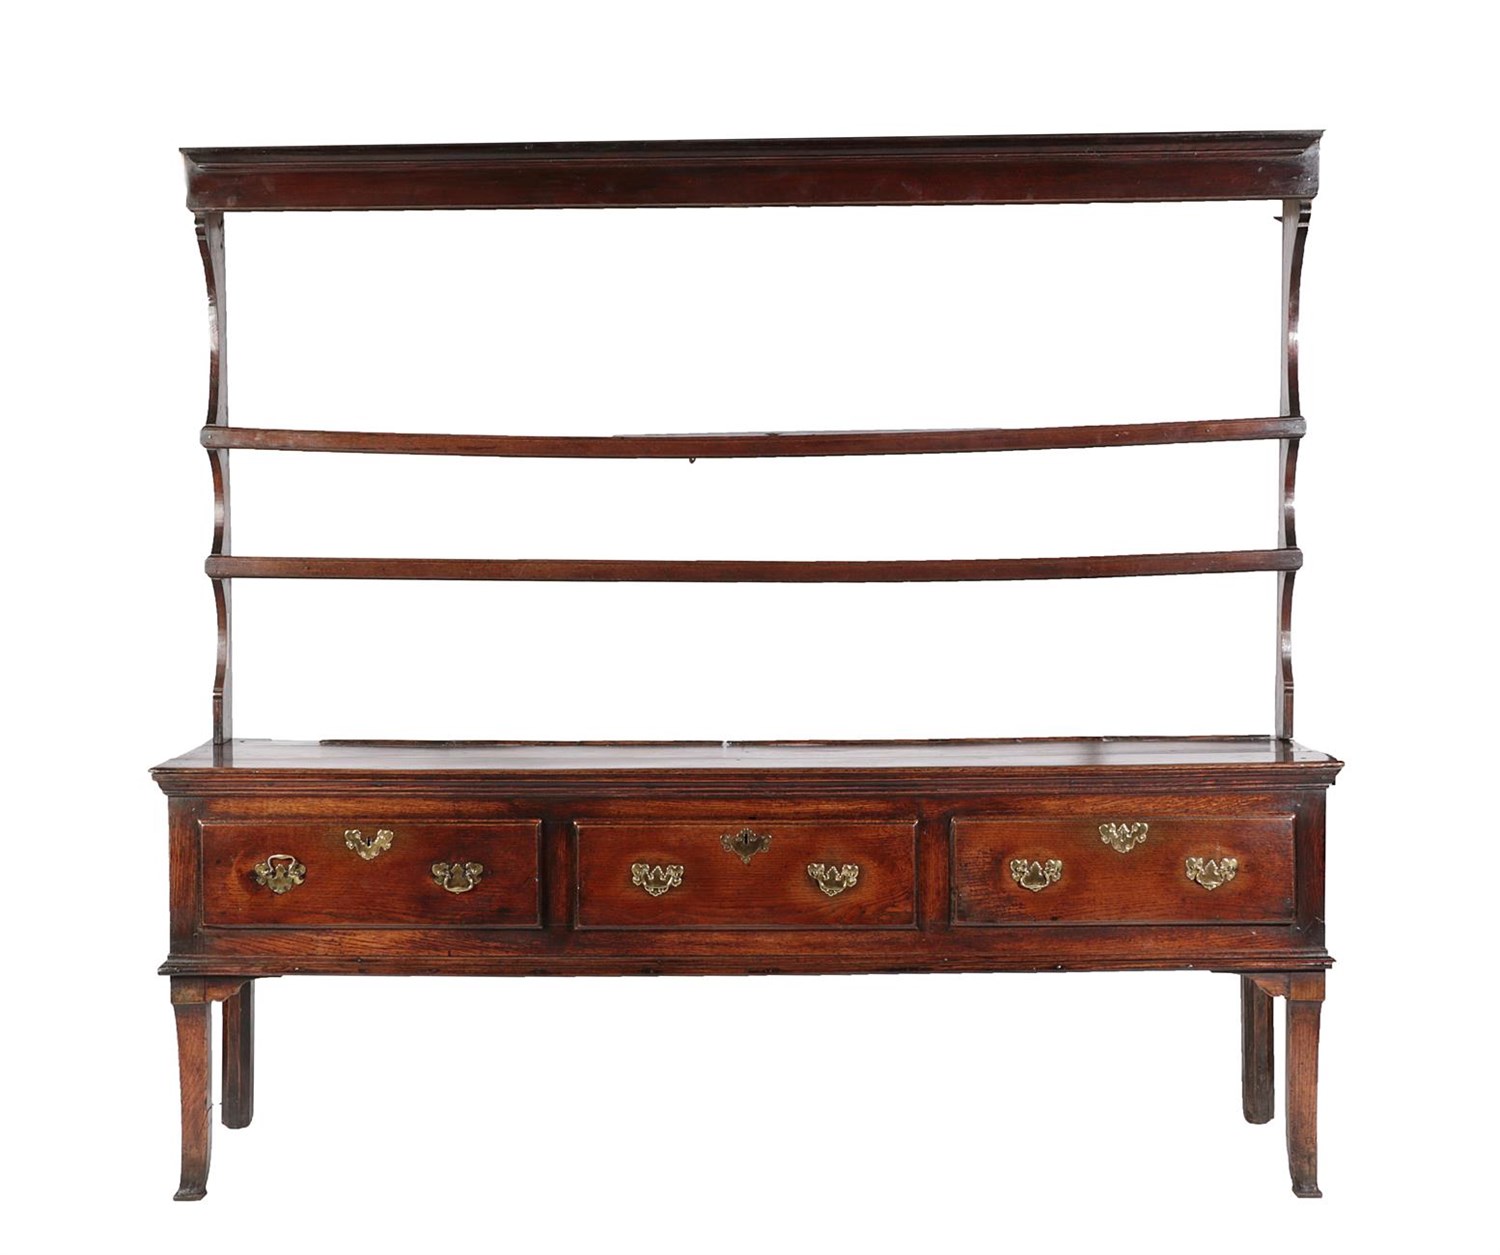 Lot 436 - A George III Oak Open Dresser, late 18th century, the rack with two shelves with scrolled end...